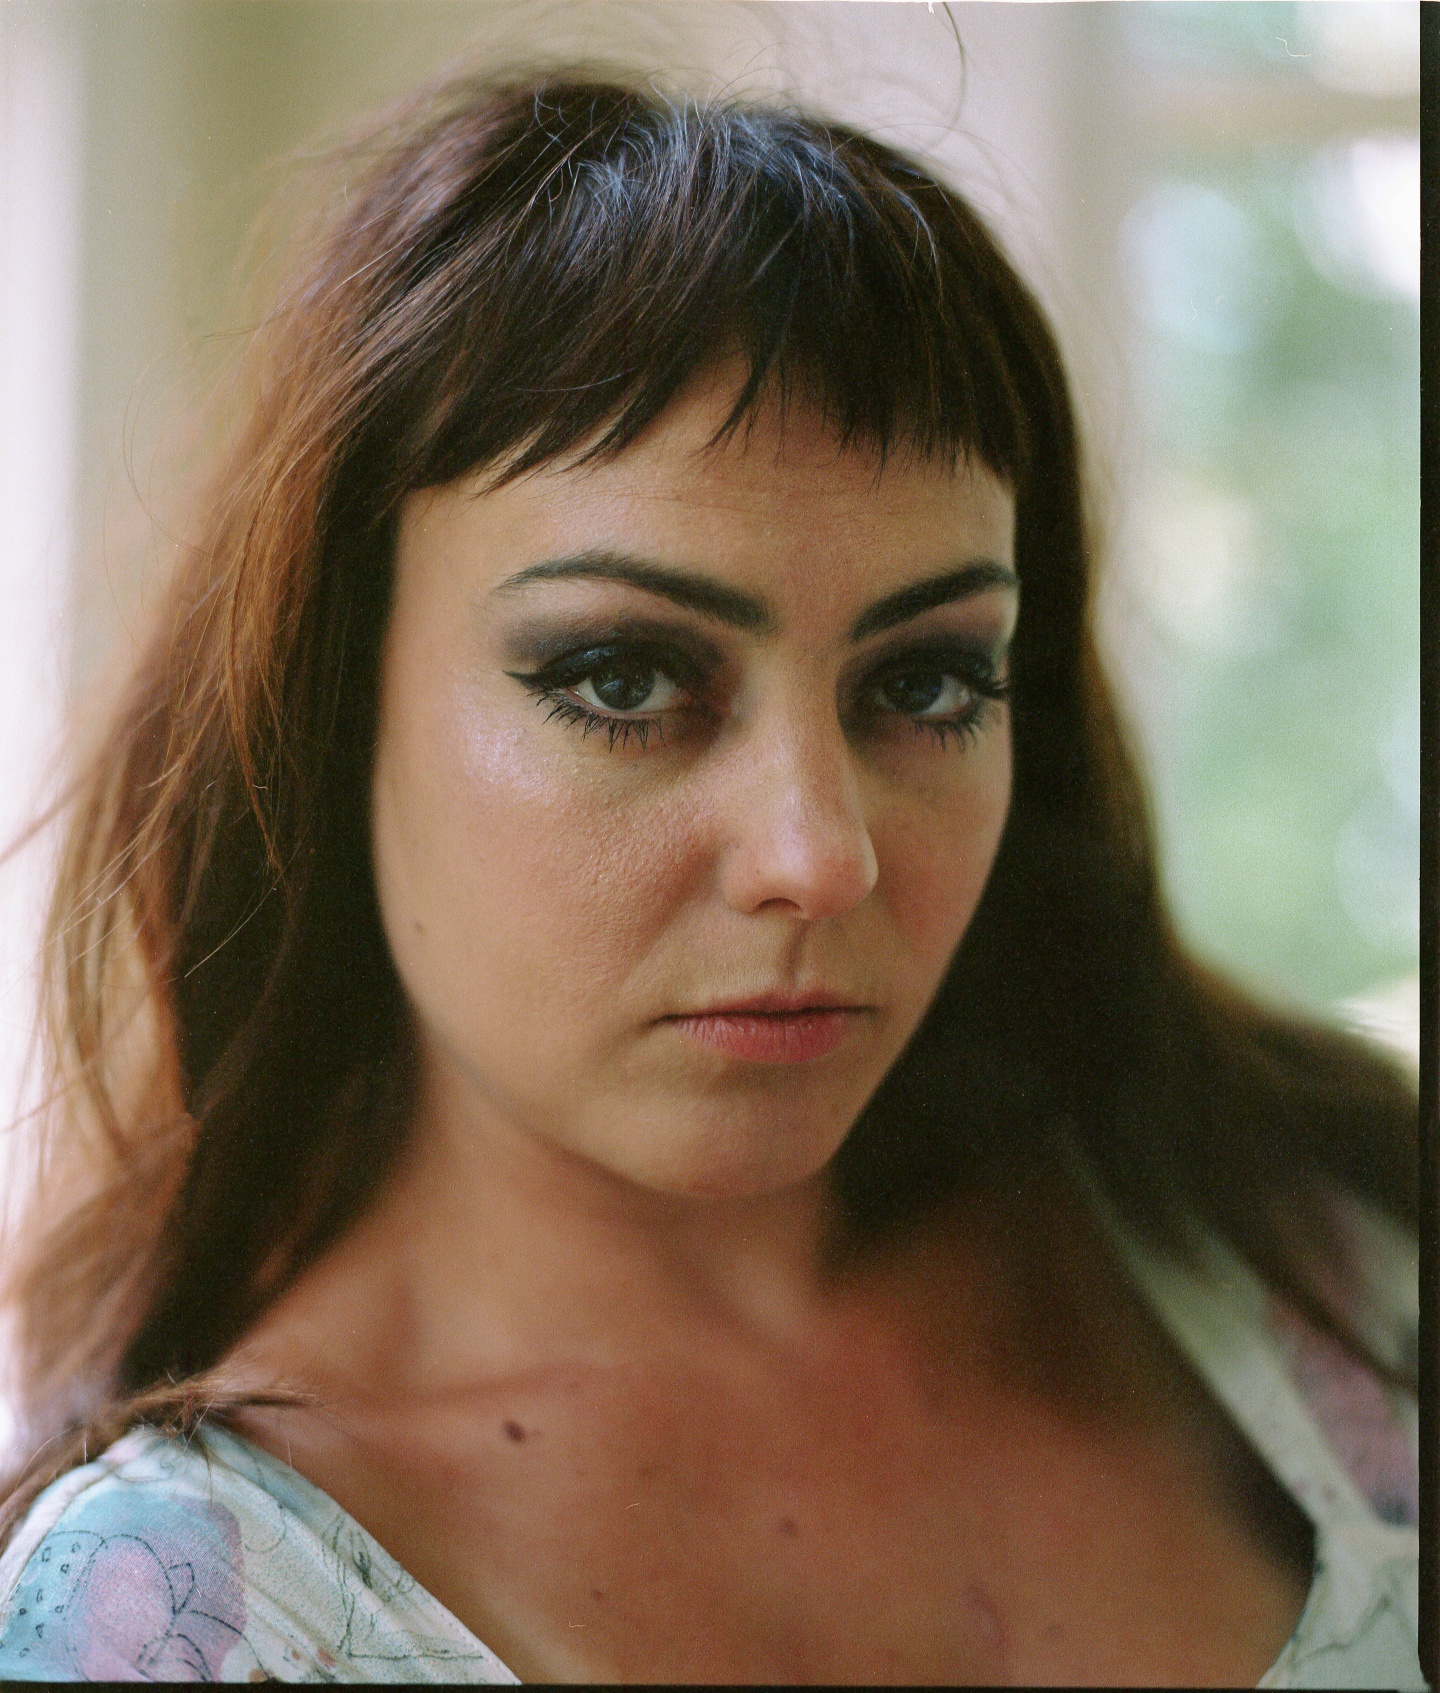 Angel Olsen is beginning to see the light